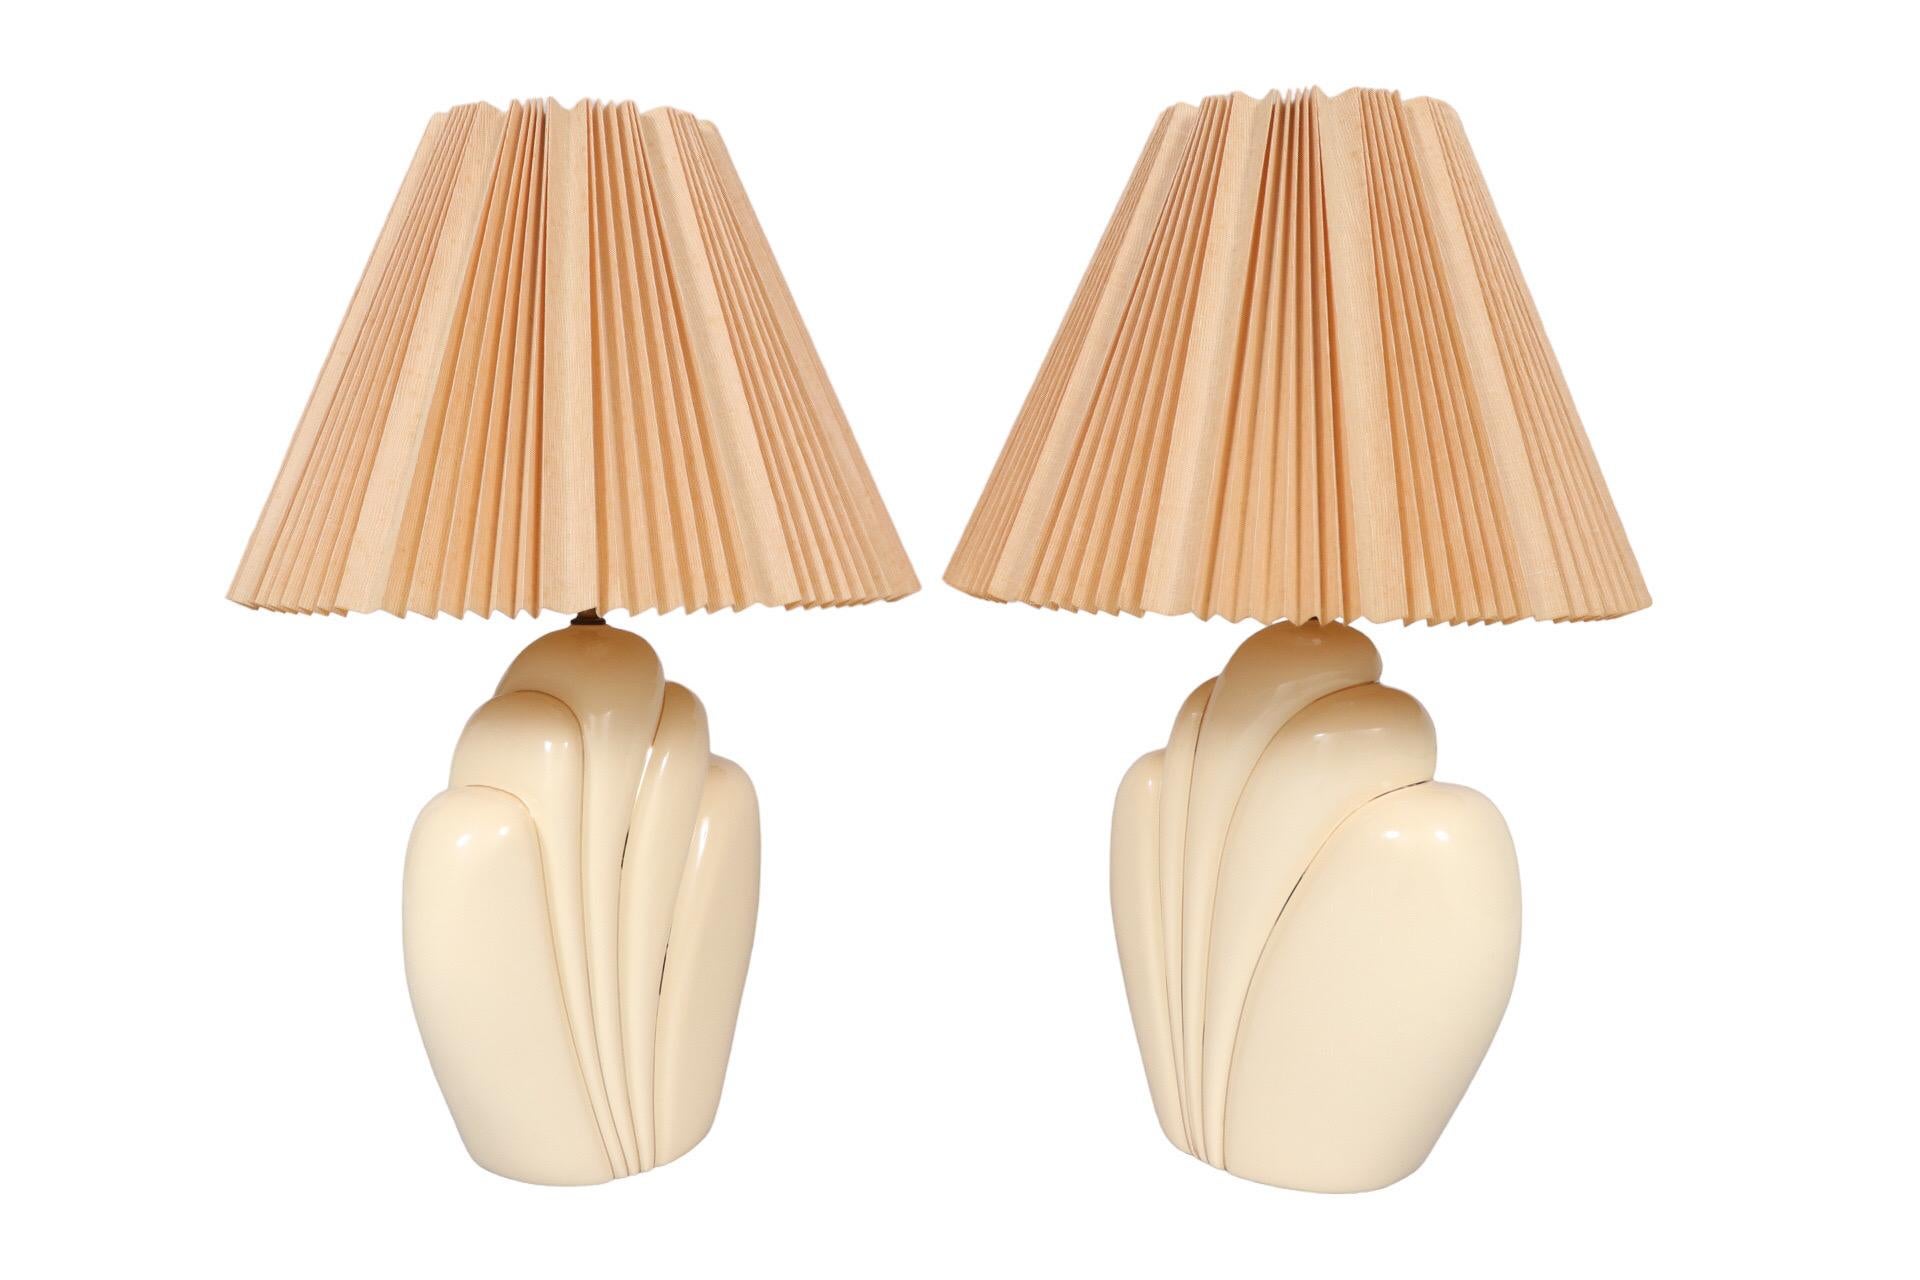 A pair of sculptural ceramic table lamps in cream. Vases are shaped like feather plumes trimmed with gilt lines. Lamps are topped with pleated empire shades in peach, topped with wooden ball finials. Wired and working. Each lamp measures 14